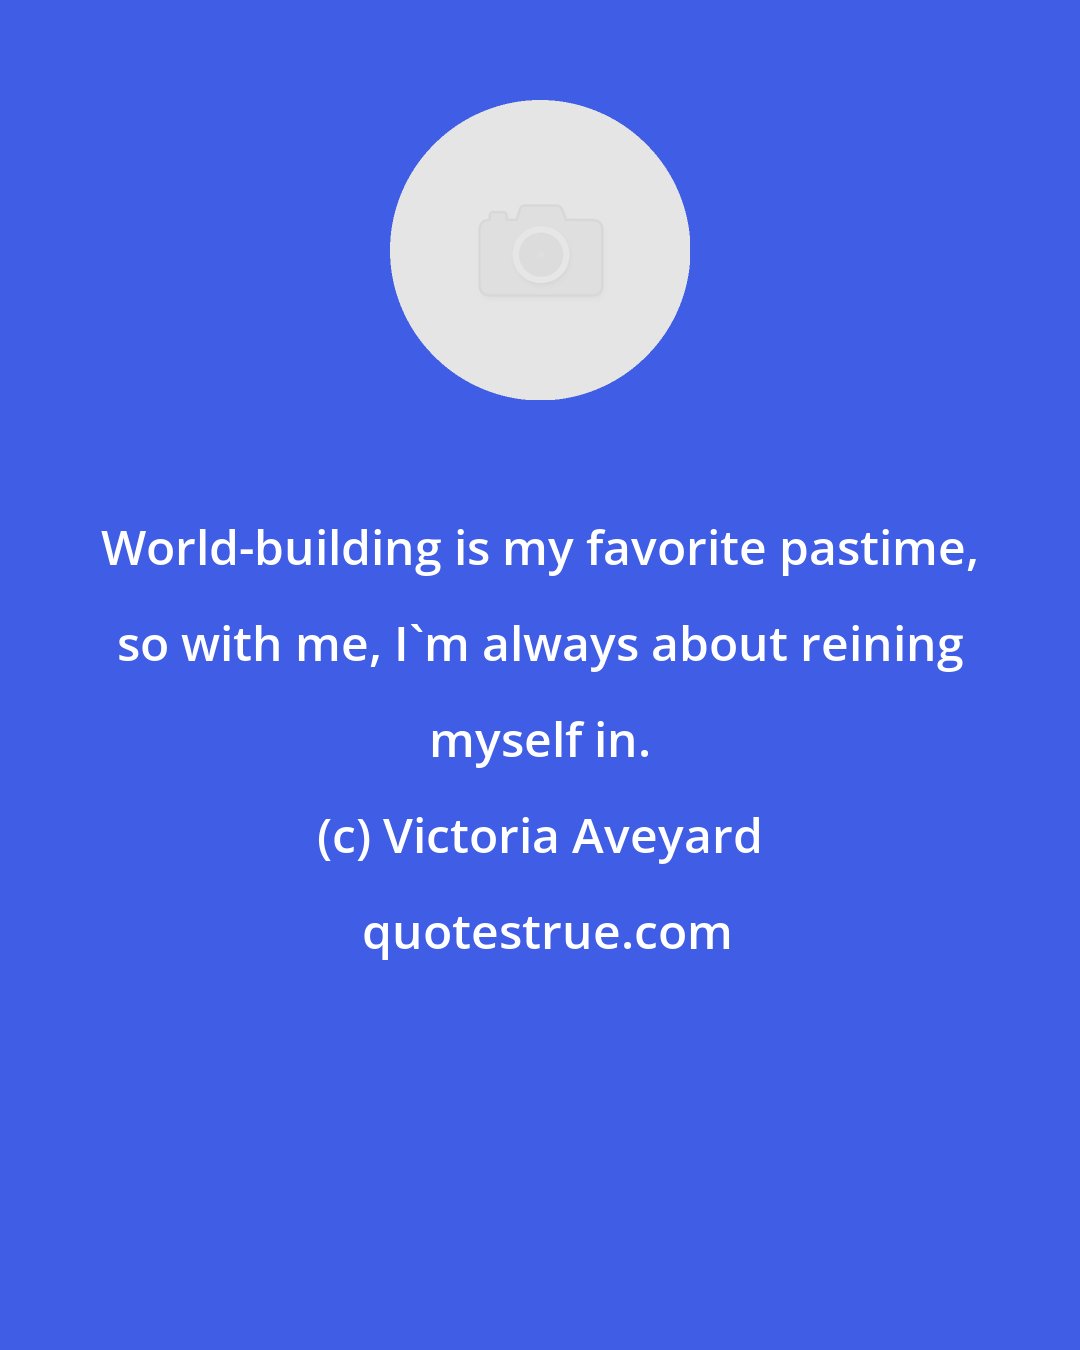 Victoria Aveyard: World-building is my favorite pastime, so with me, I'm always about reining myself in.